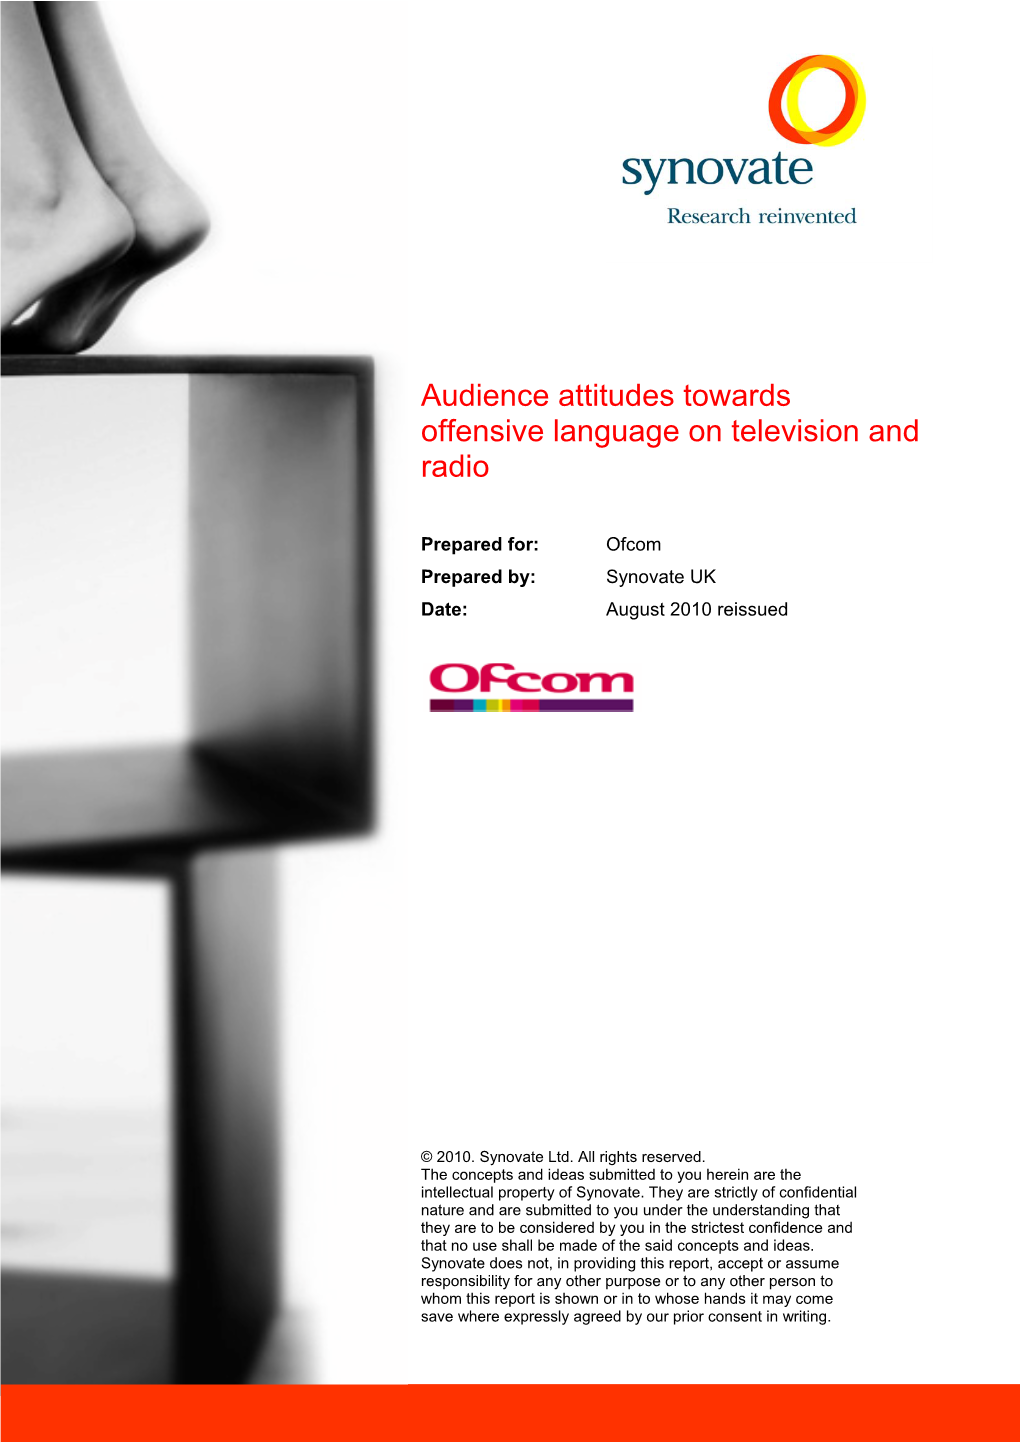 Audience Attitudes Towards Offensive Language on Television and Radio